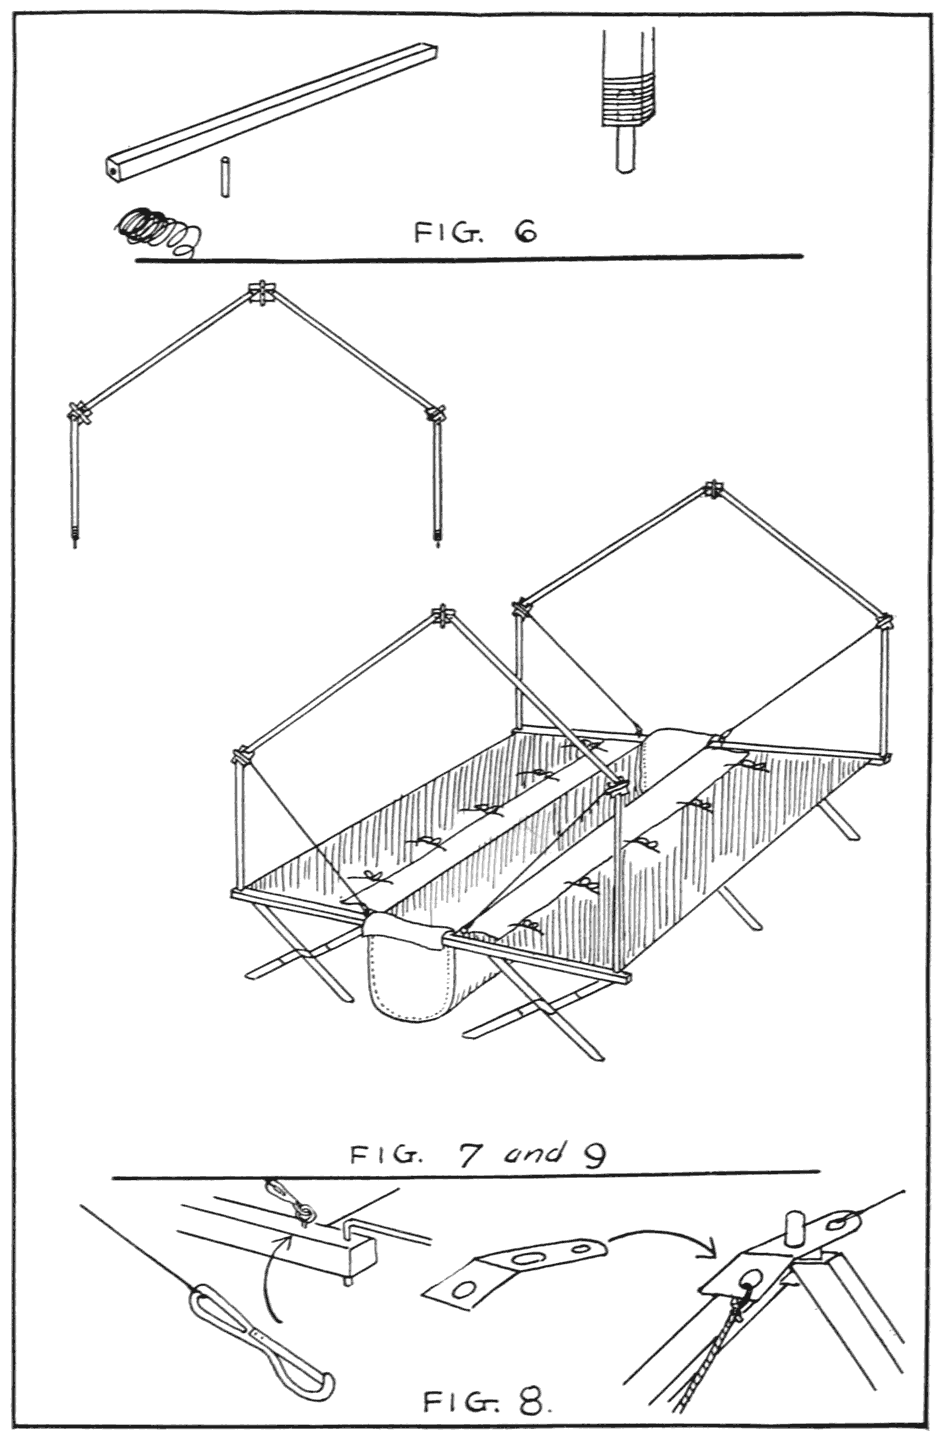 Detail of framework of home-made camping outfit. Note in Fig. 6
how the little piece of dowel stick is inserted into the upright of the
tent frame. Figs. 7 and 9 show how the frame and cots are assembled,
while Fig. 8 gives detail for wiring.